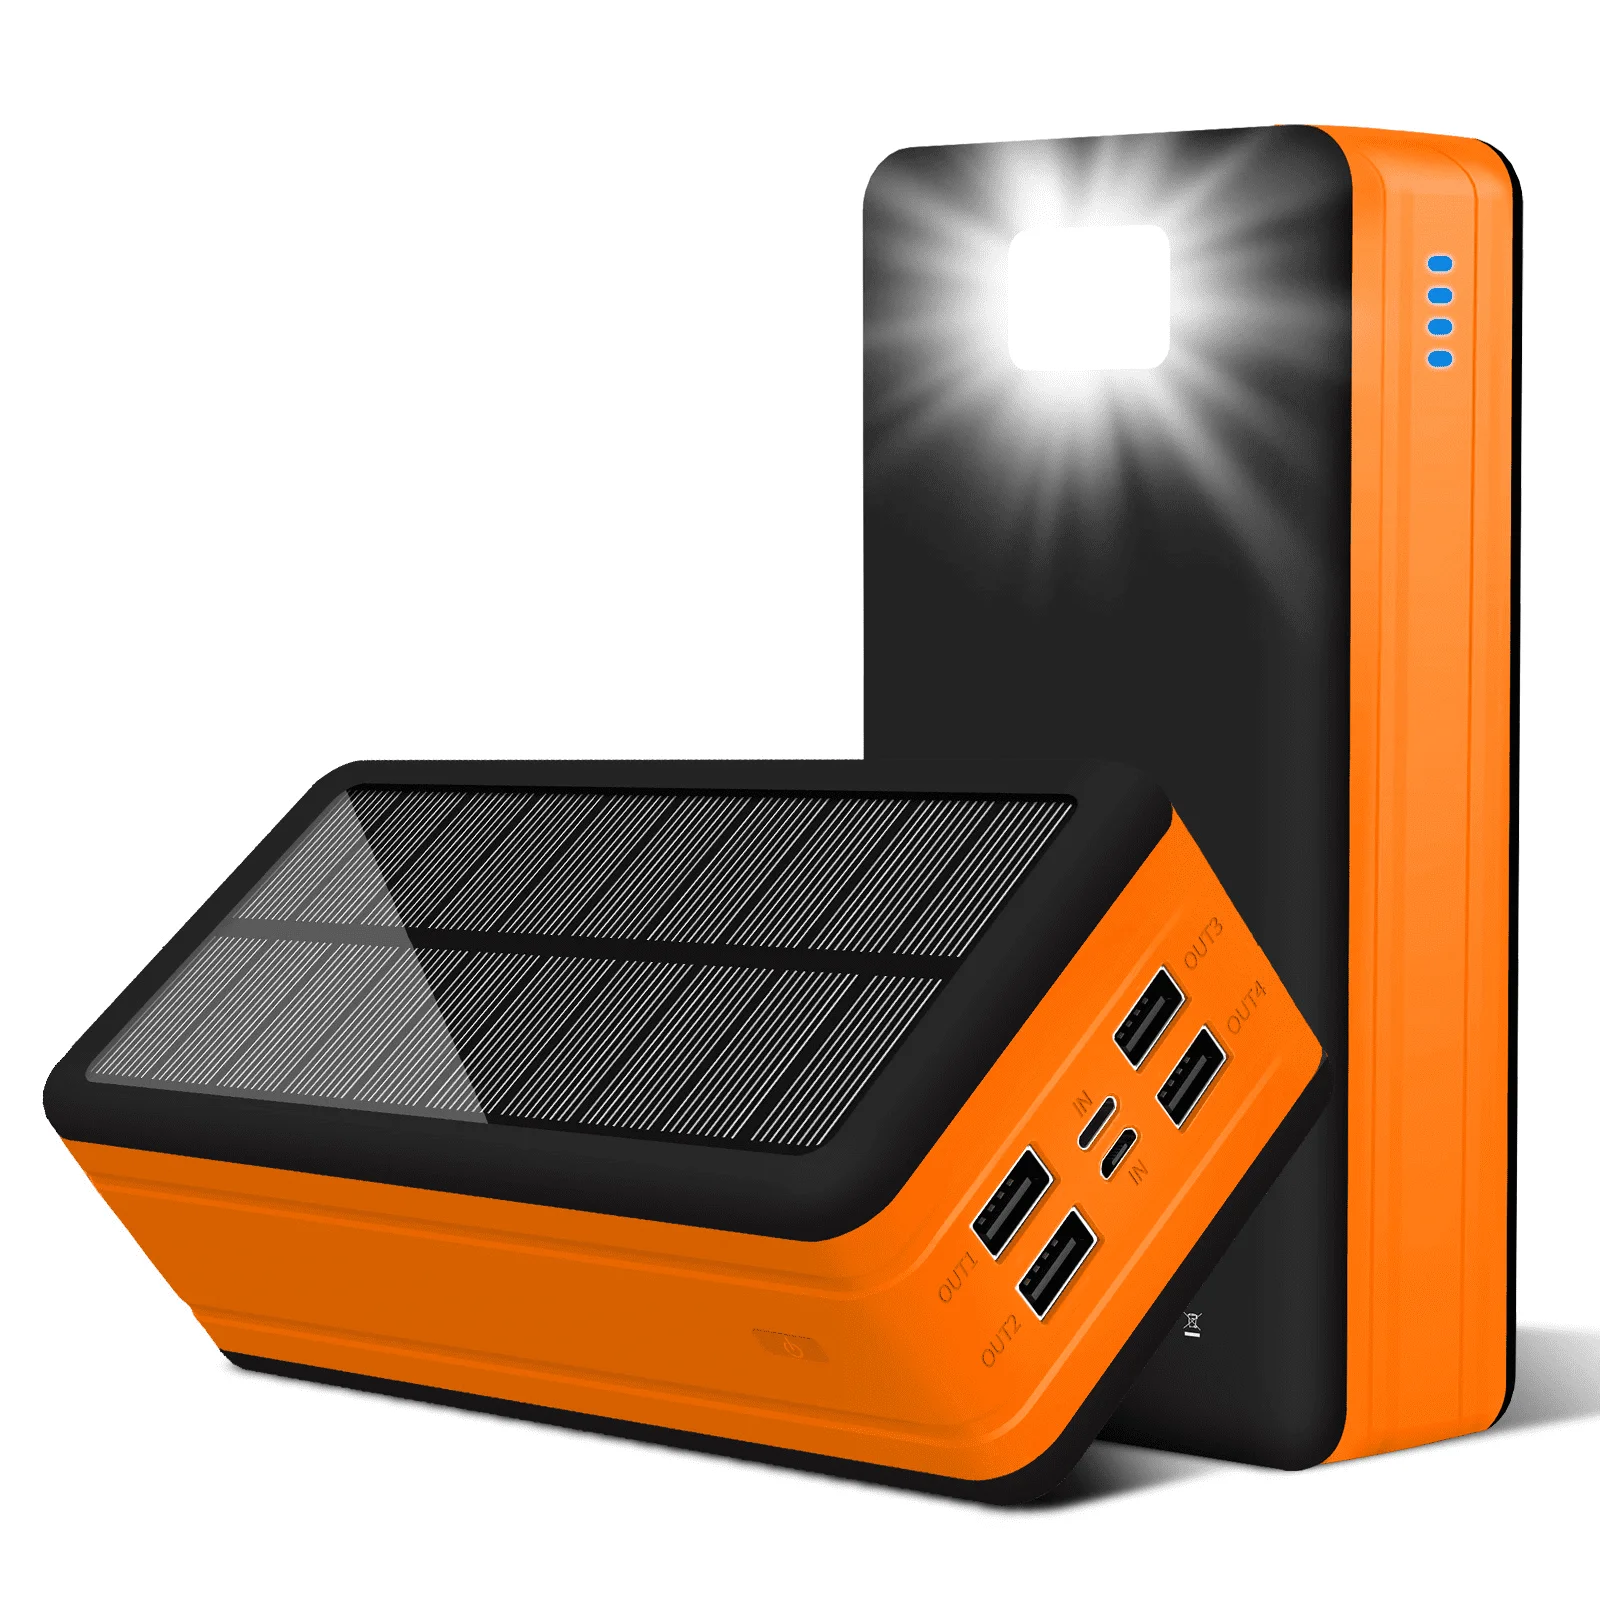 

Solar Power Bank 50000mAh, Portable Solar Phone Charger with Flashlight, 4 Output Ports, 2 Input Ports, Solar Battery Bank Compa